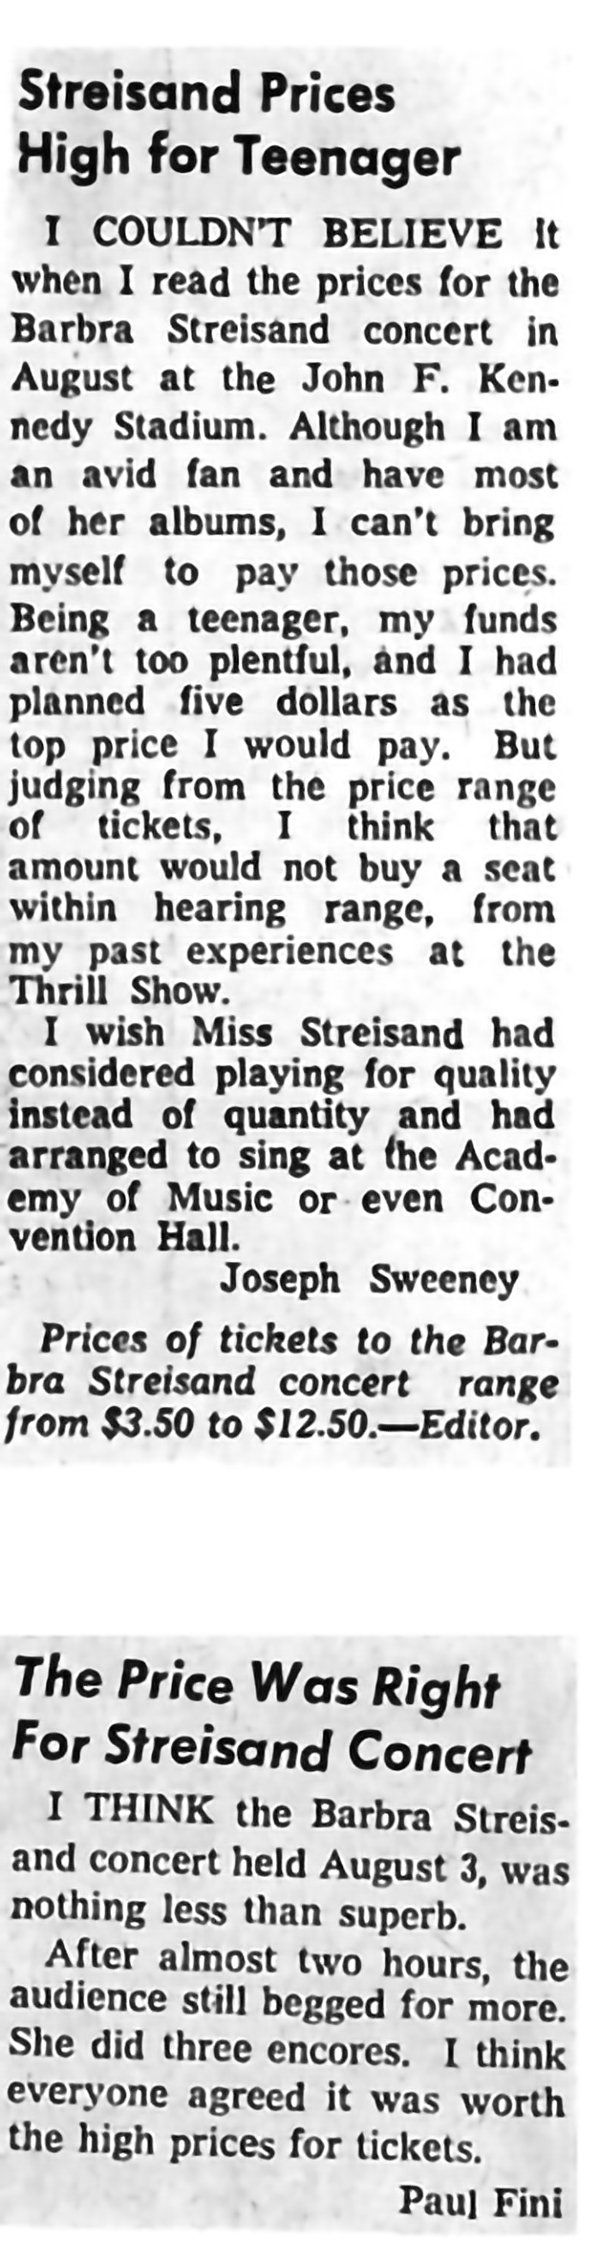 Newspaper clippings of a teenager writing in to complain about ticket prices.